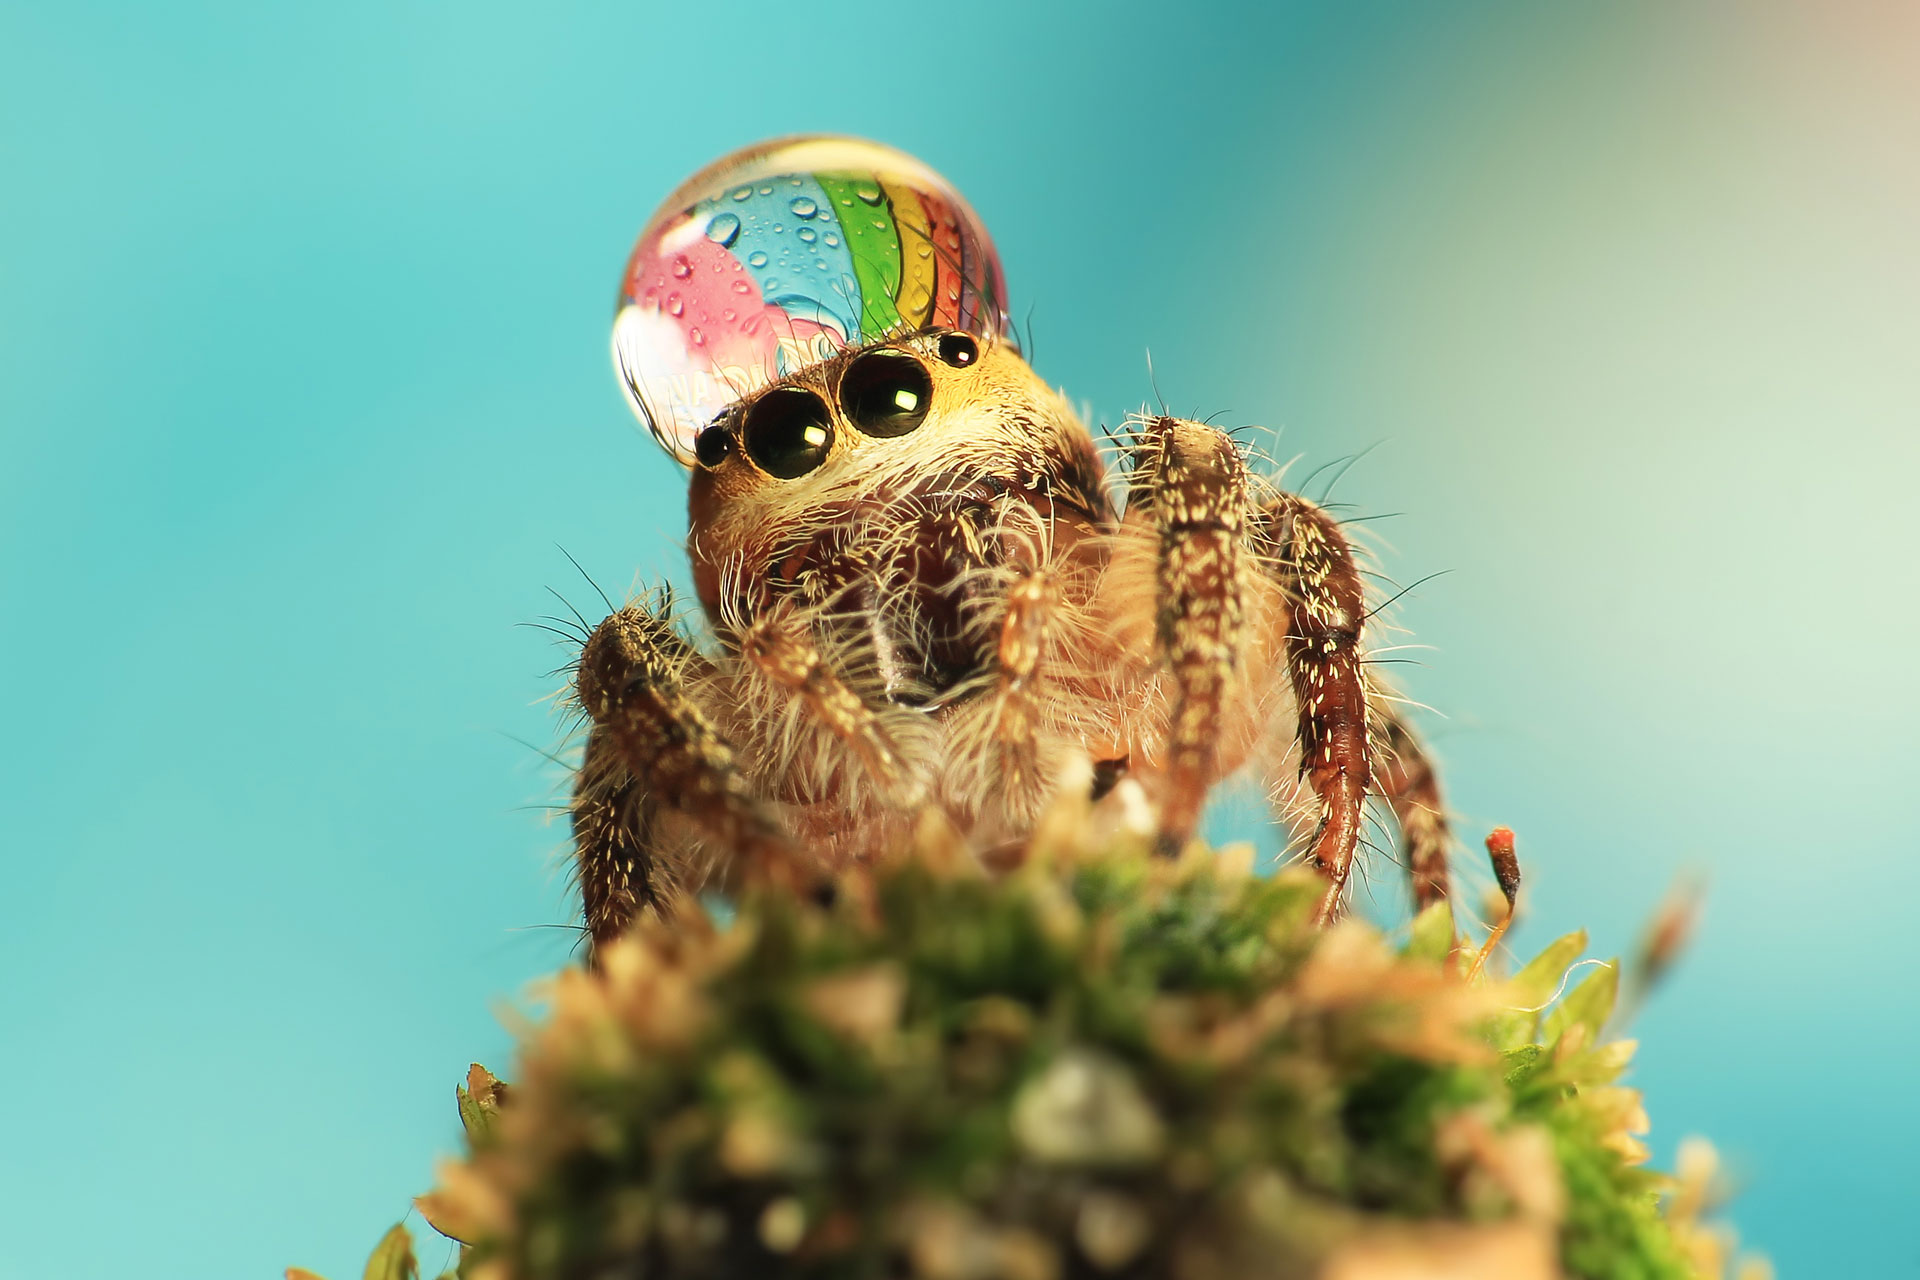 Just a spider with a hat.